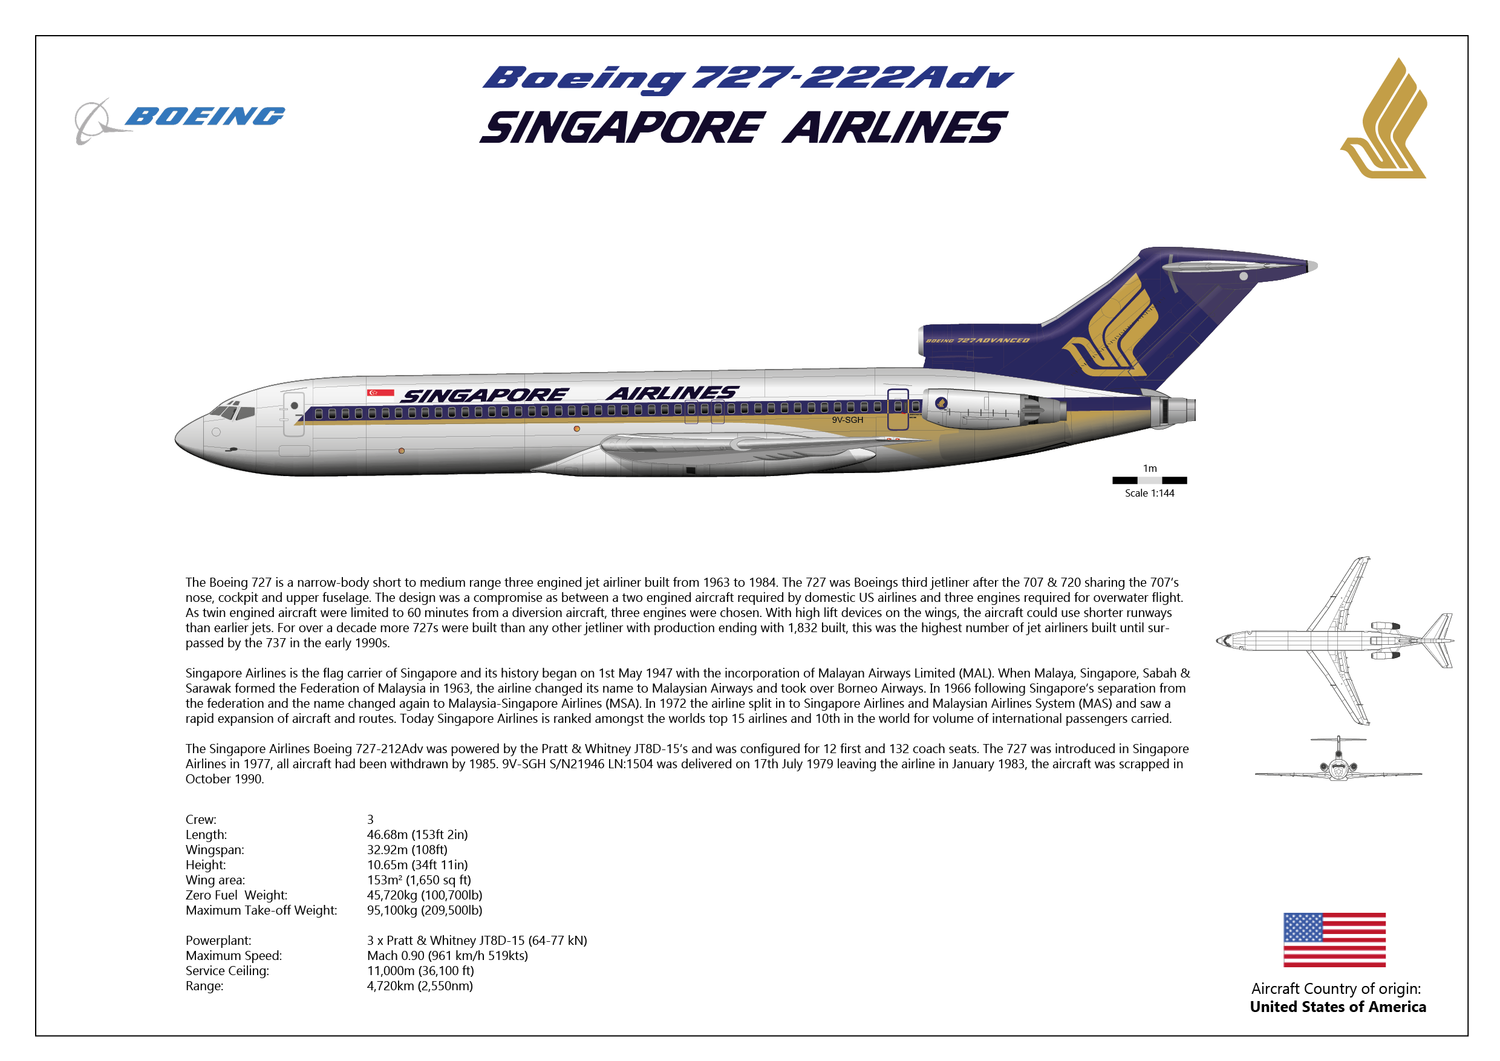 Boeing 727-200Adv Singapore Airlines - Digital Download